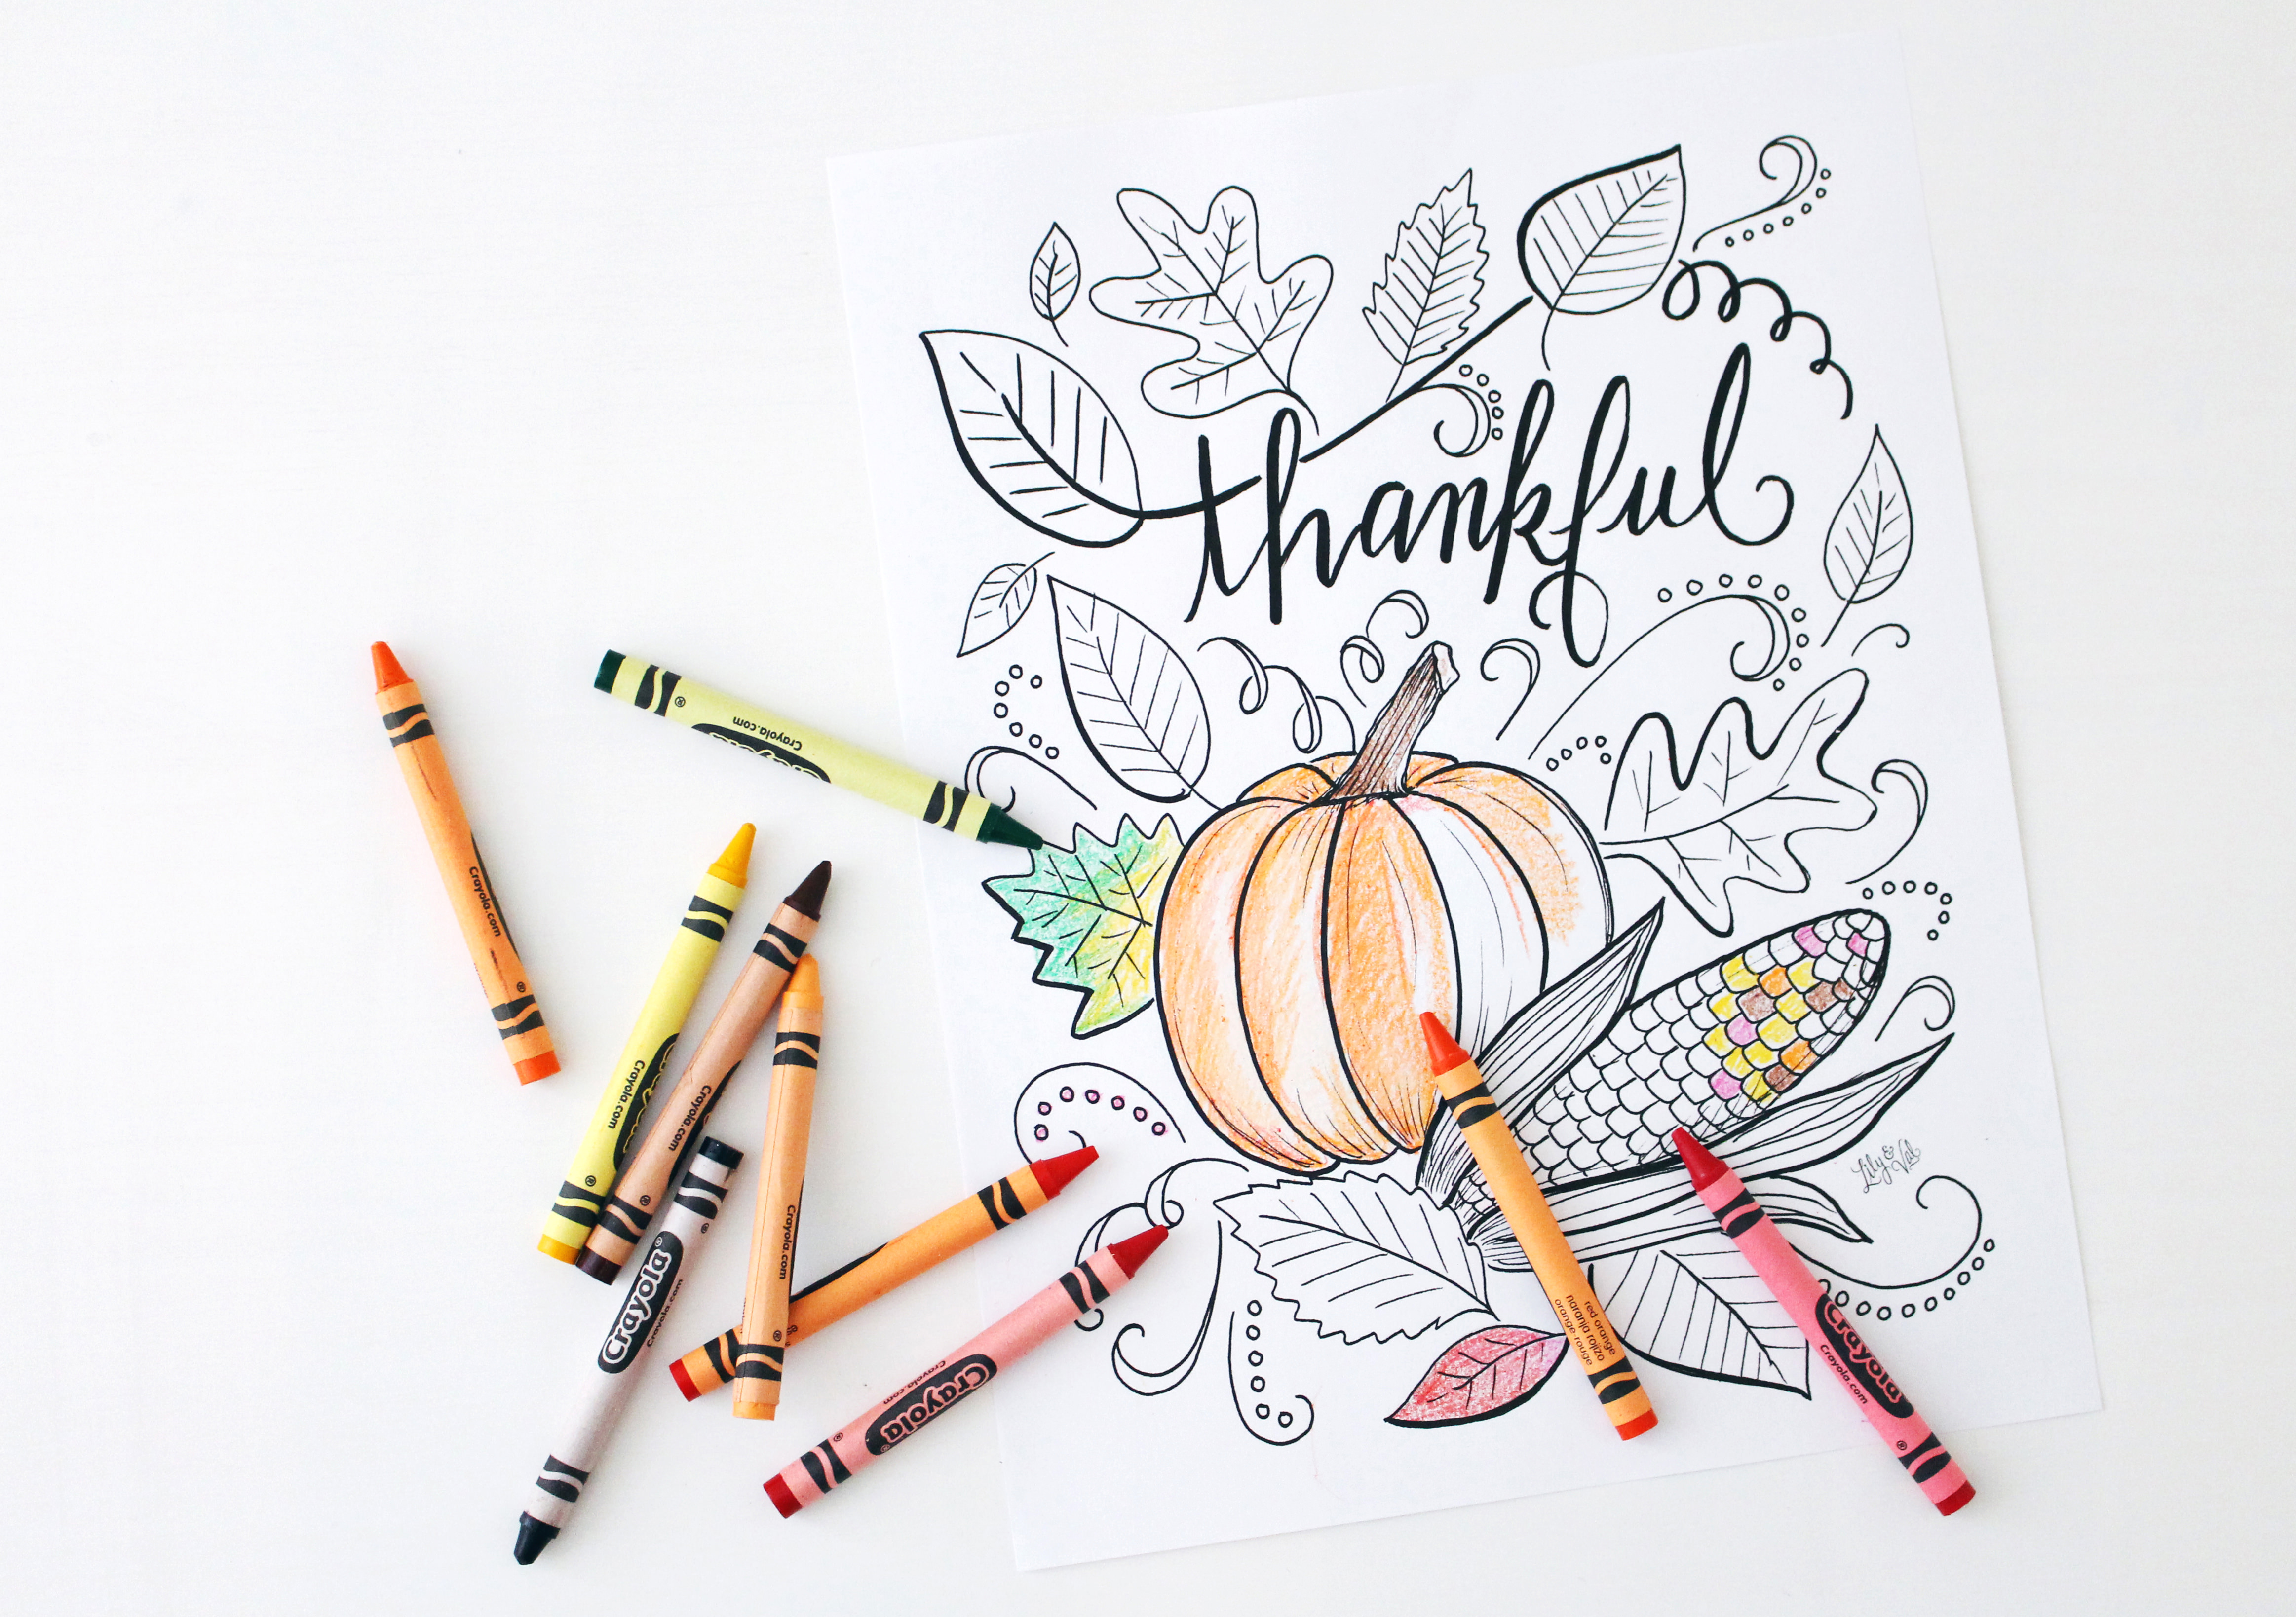 Free Thanksgiving coloring page download - great for adults and kids alike!